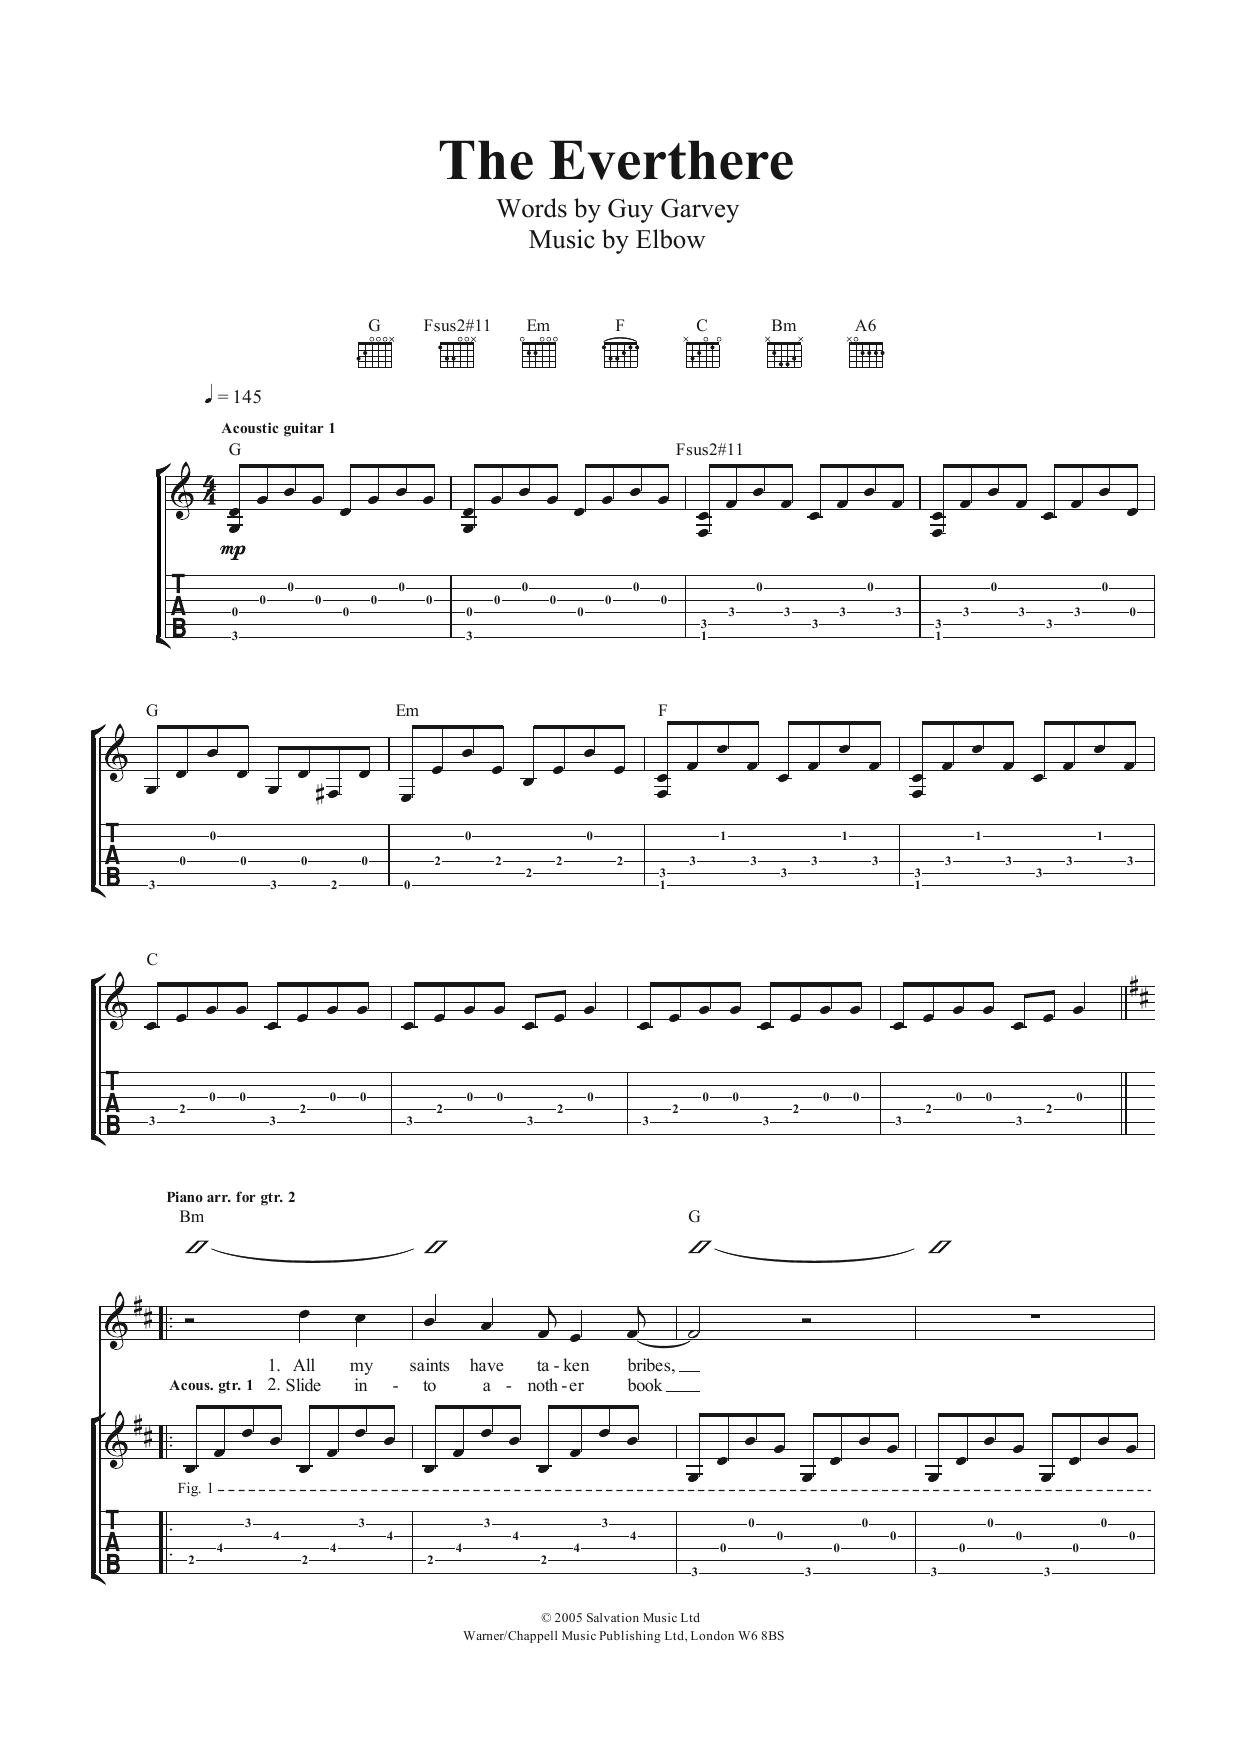 Download Elbow The Everthere Sheet Music